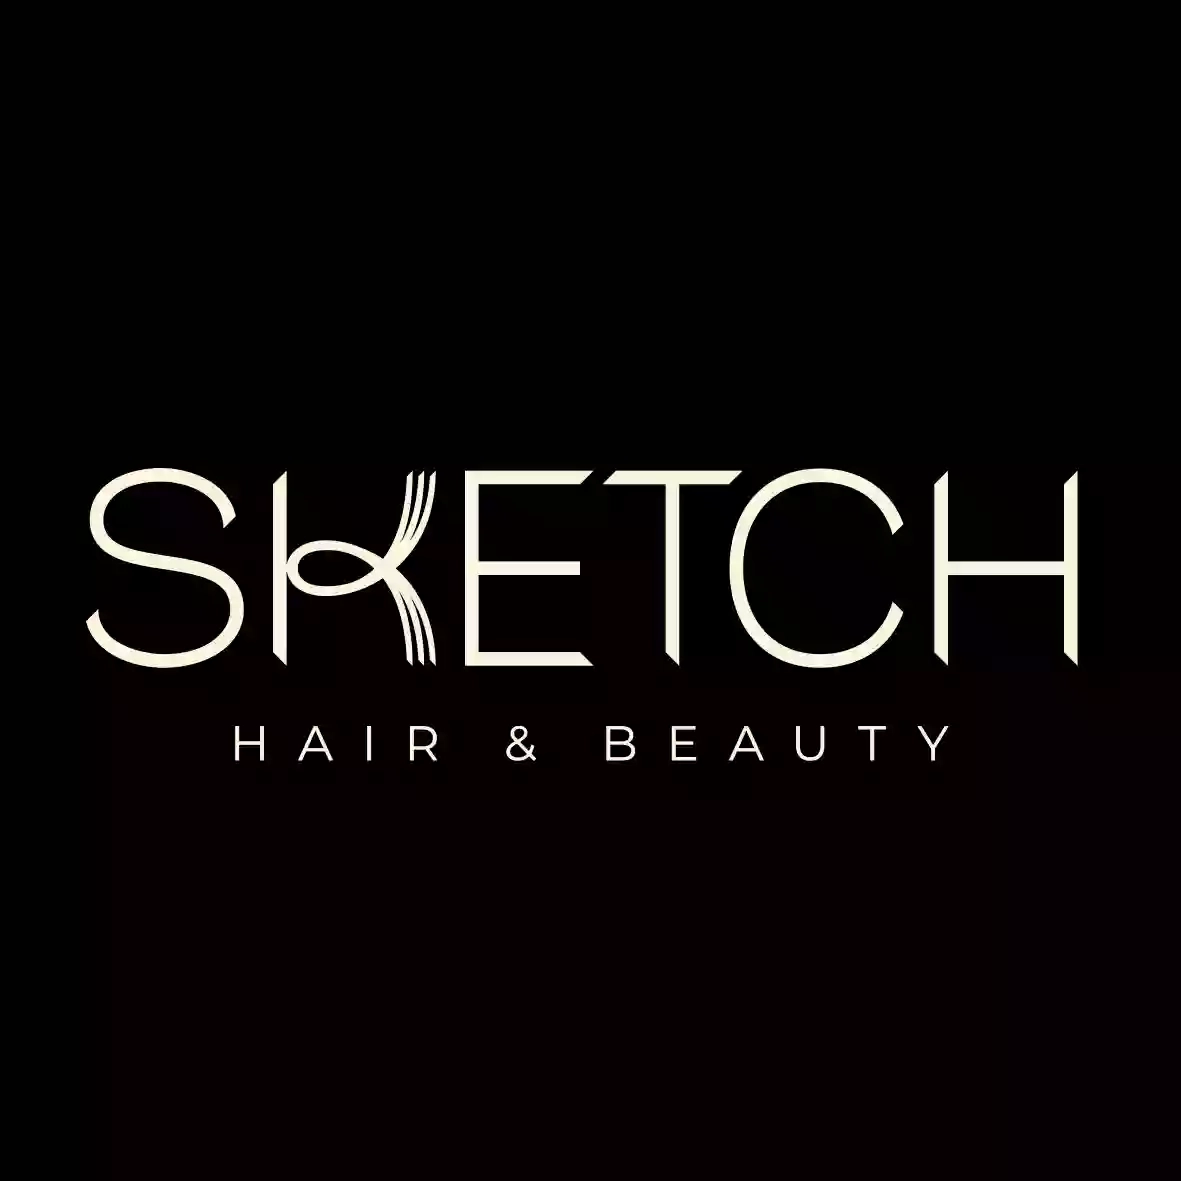 Sketch hair and beauty